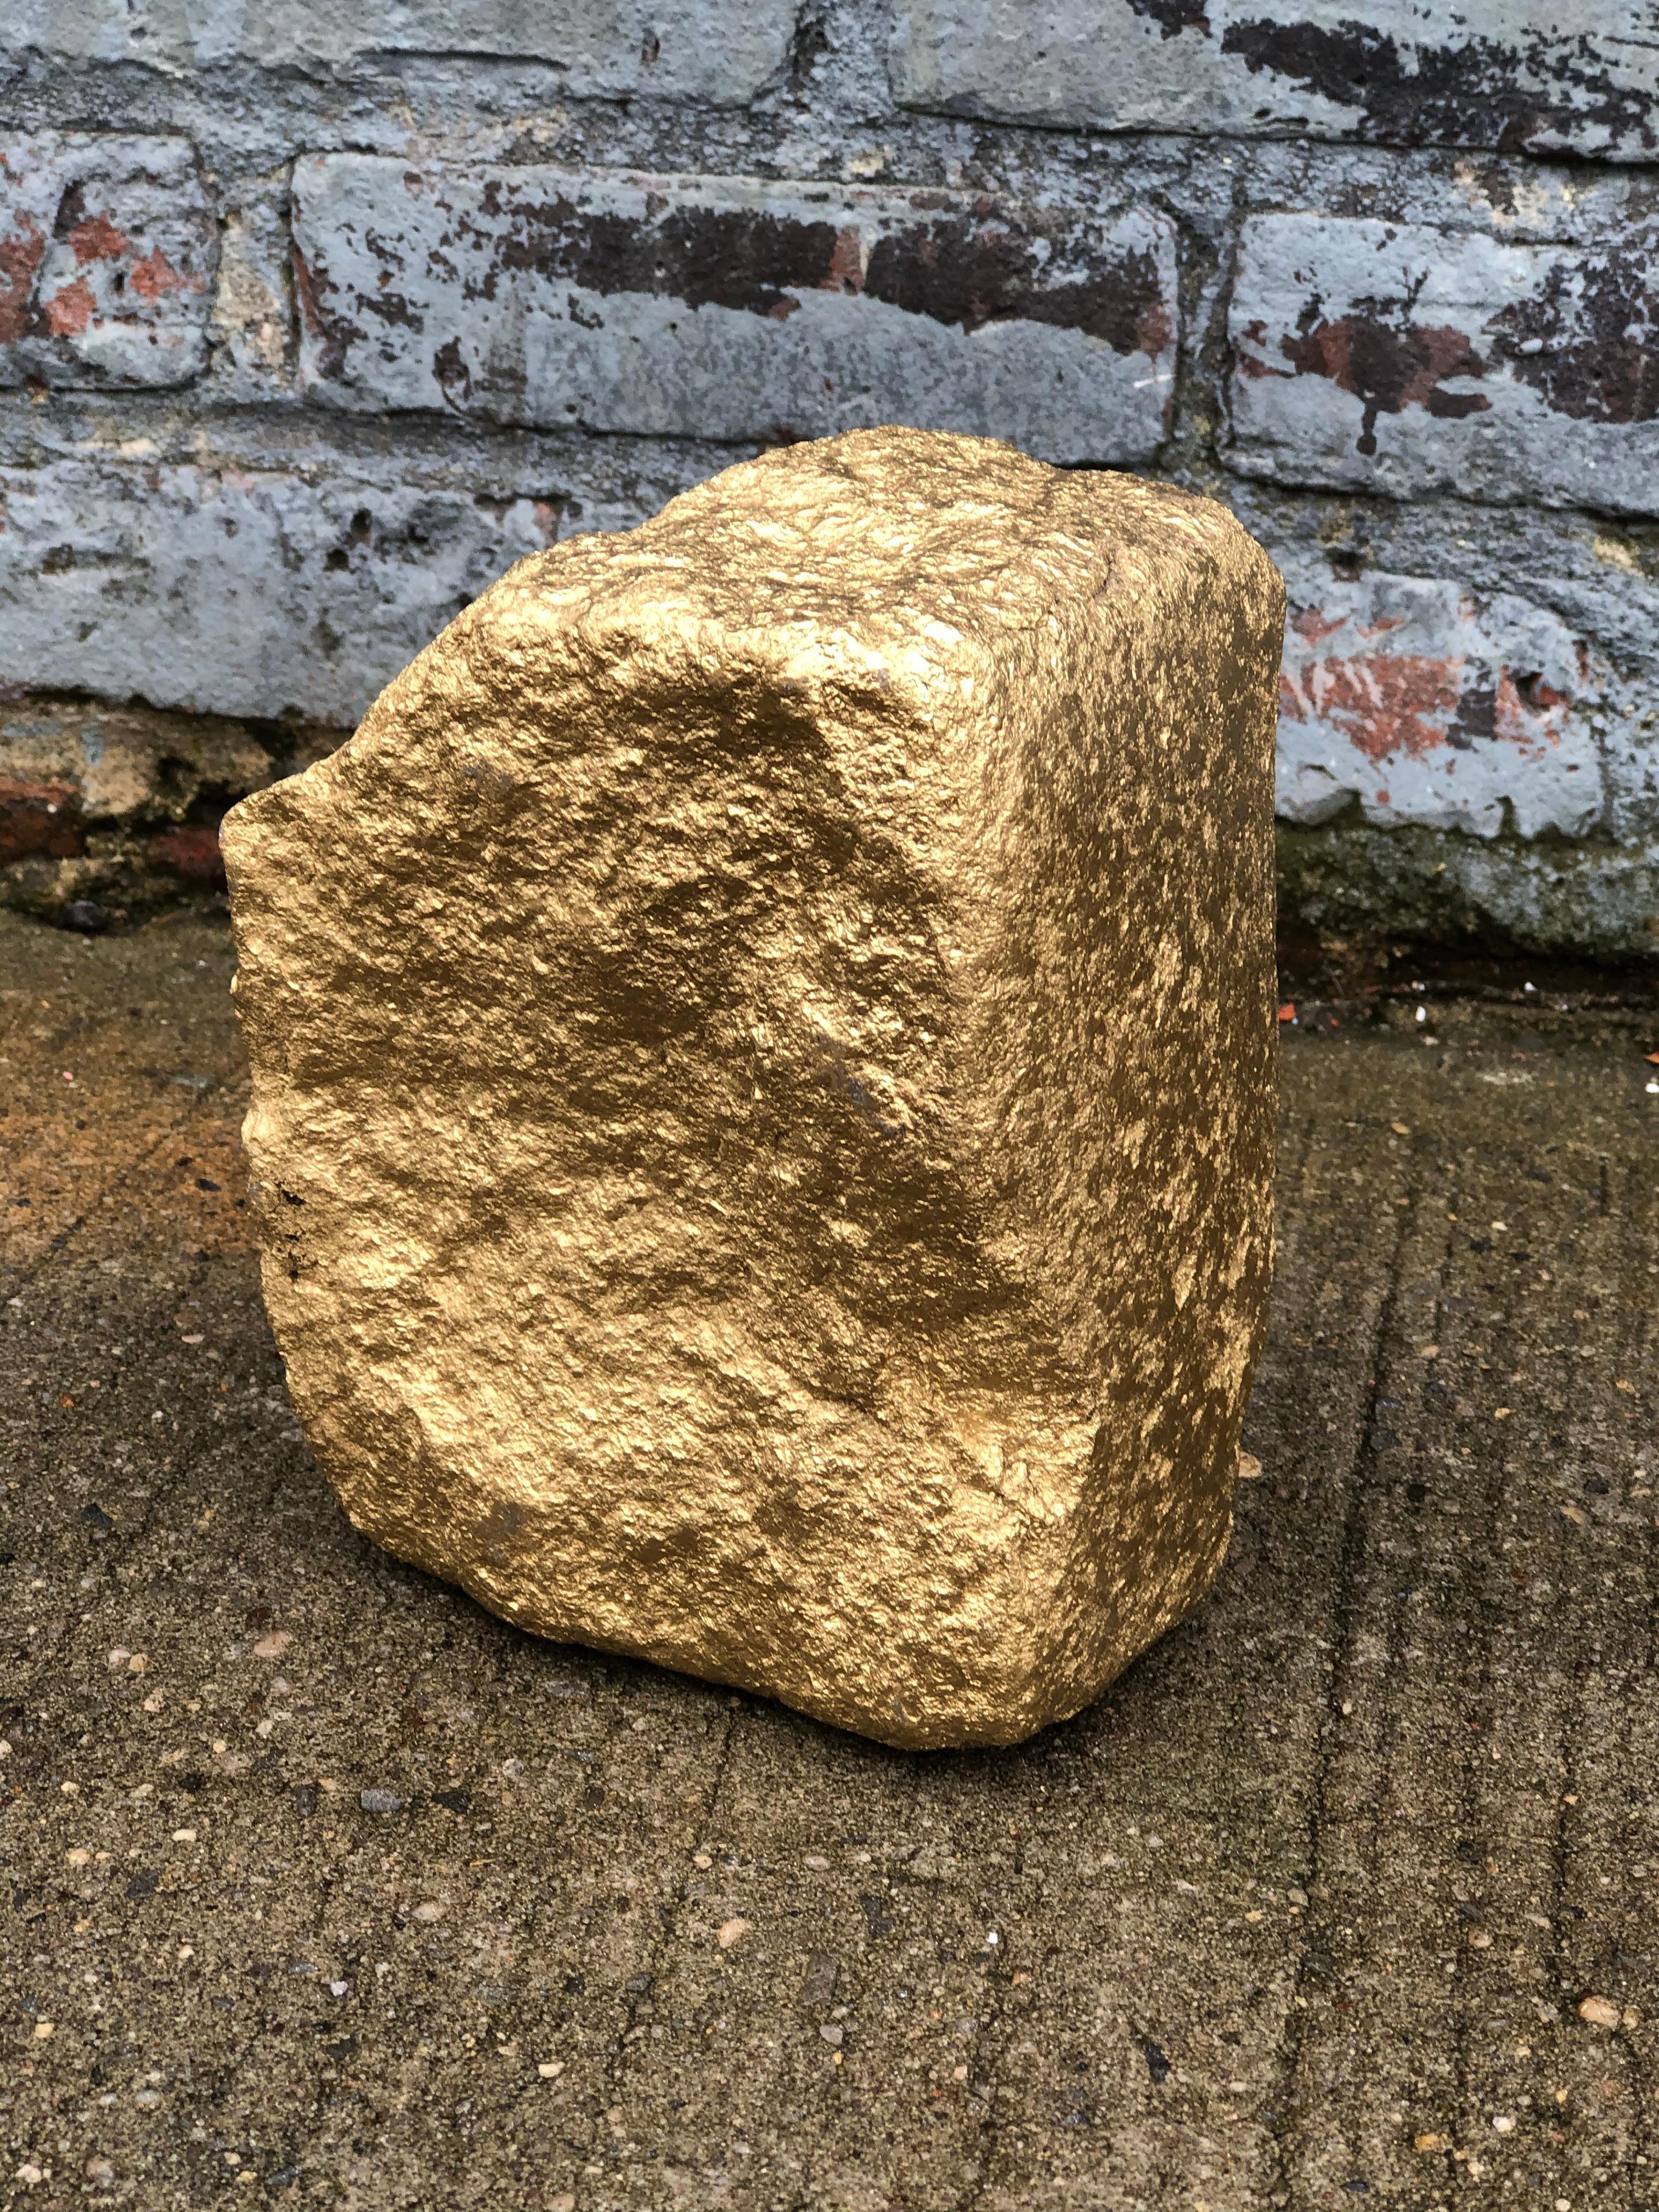 One of a kind and unique door stopper. Shiny gold in Belgian block style stone. Very heavy and perfect stylish way to keep the door ajar.